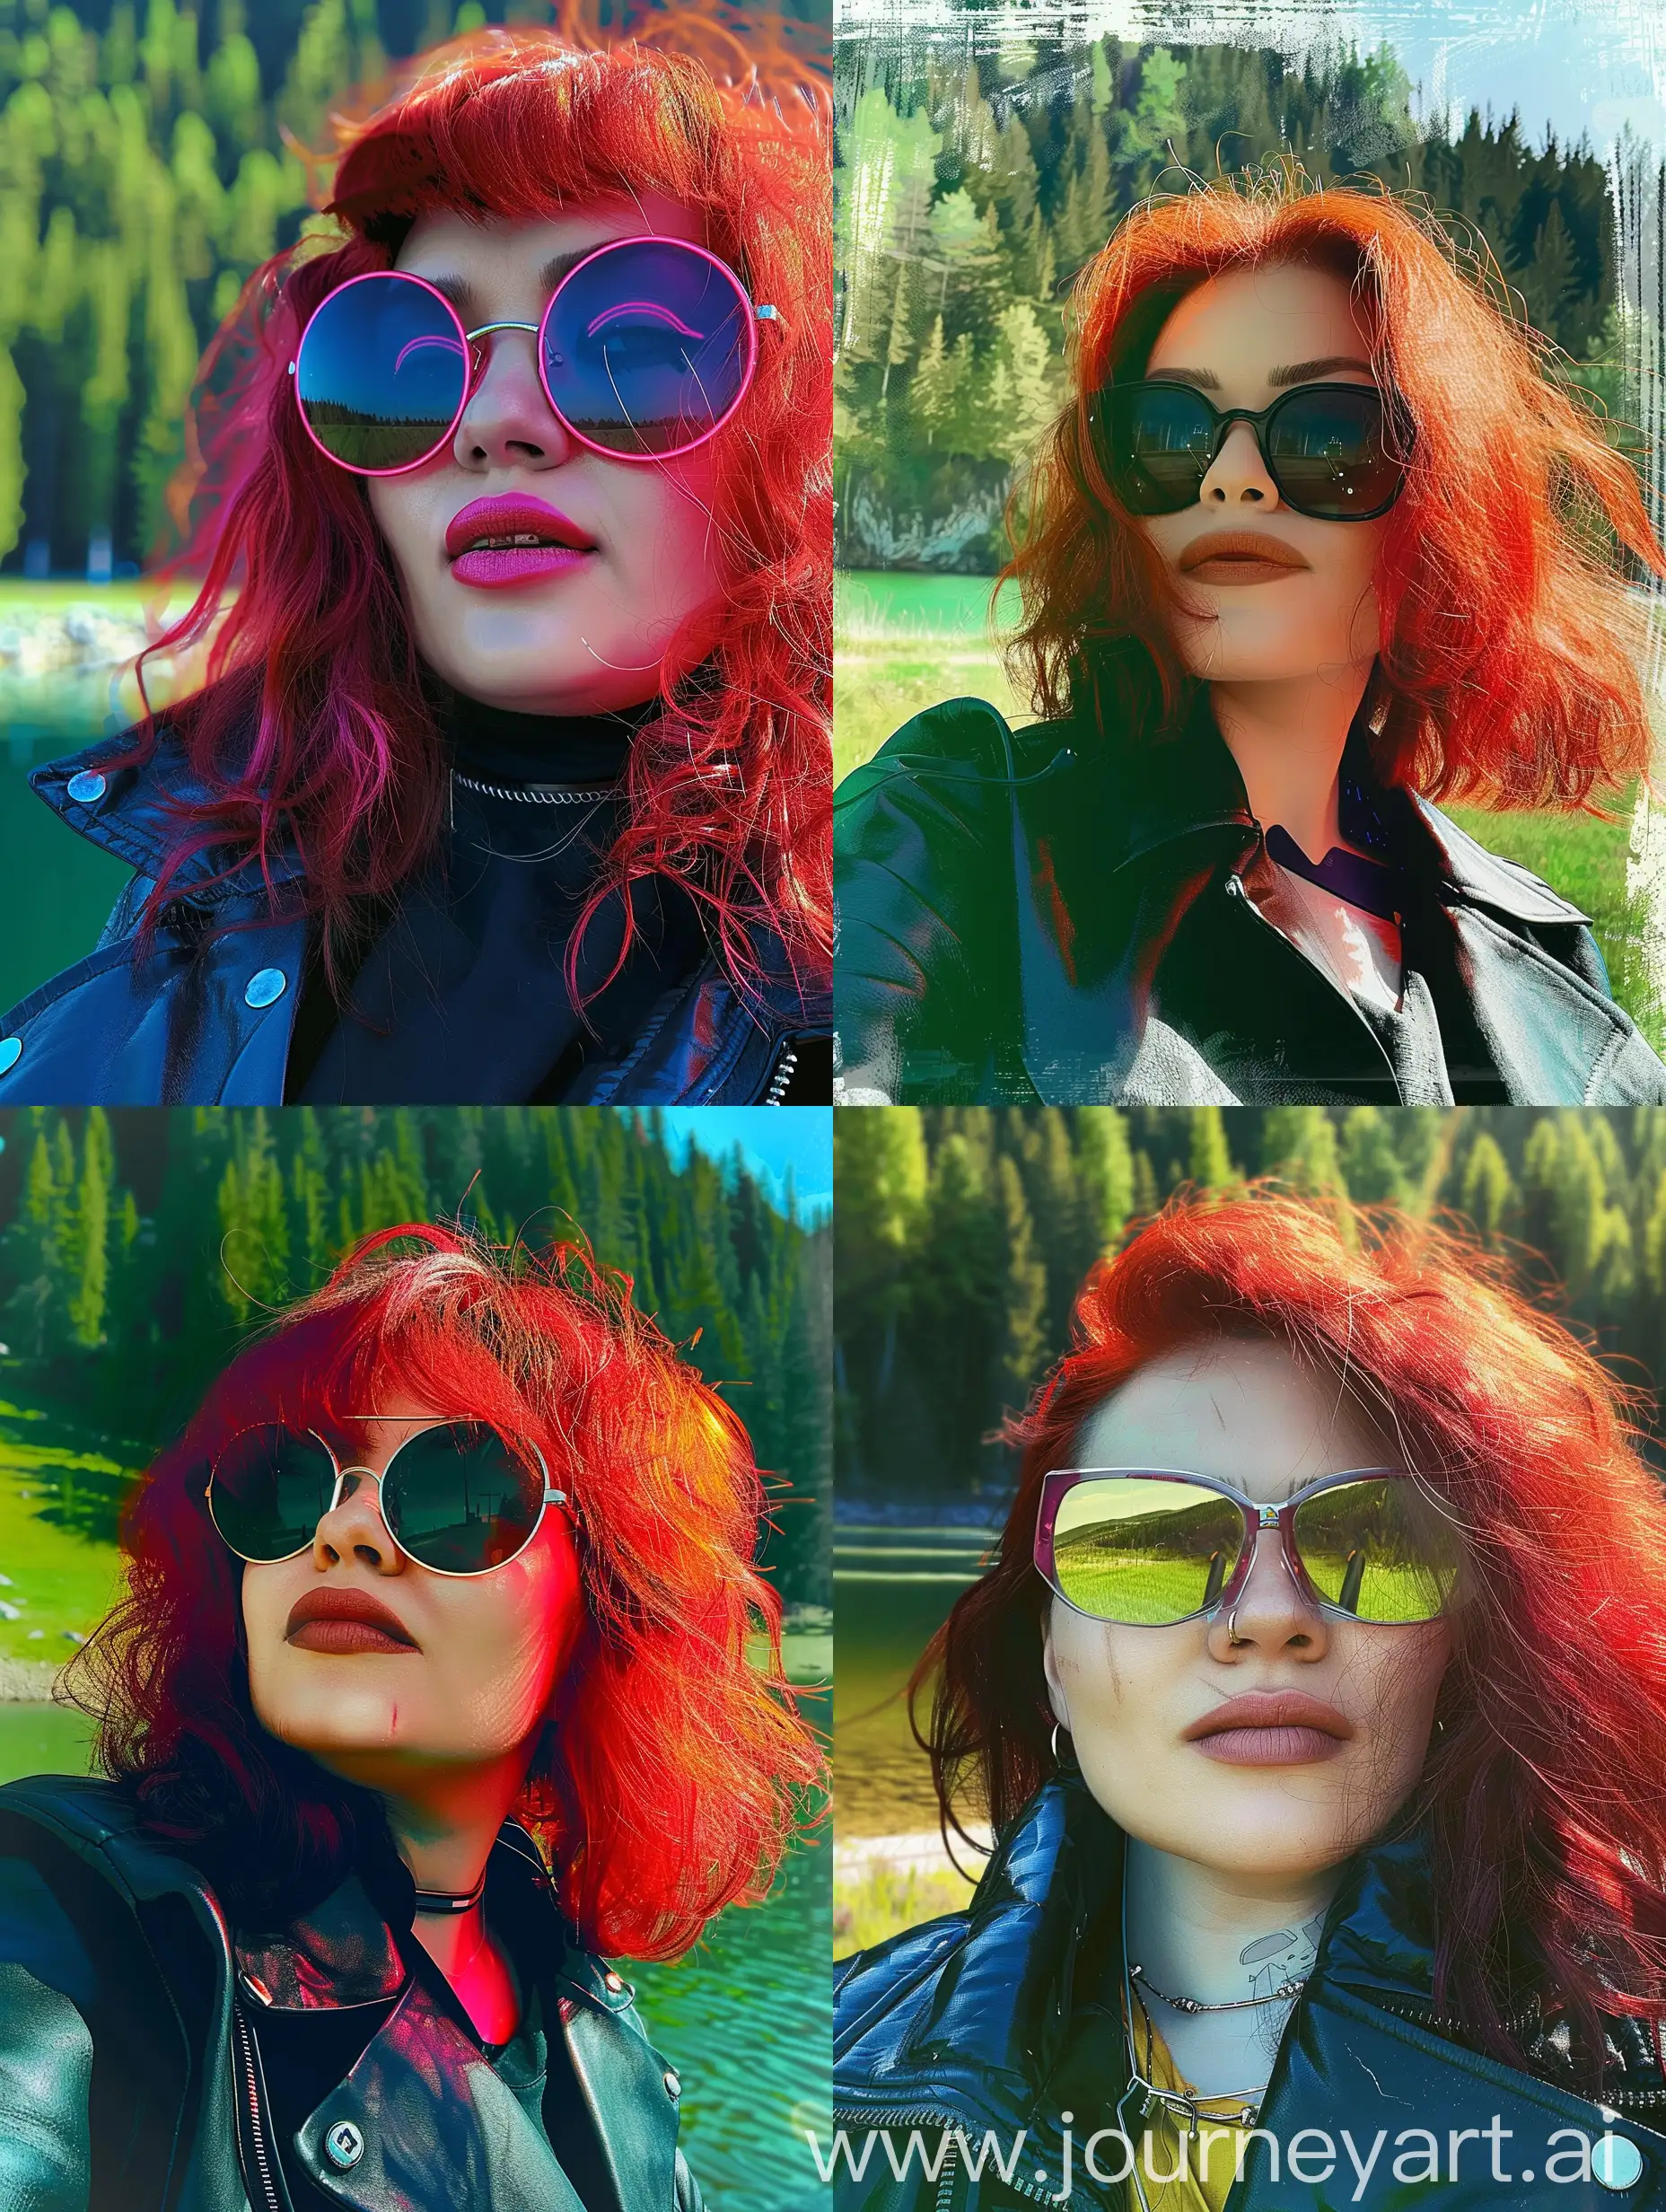 Futuristic-Cyberpunk-Woman-with-Red-Hair-and-Dark-Glasses-in-NeonLit-Urban-Environment